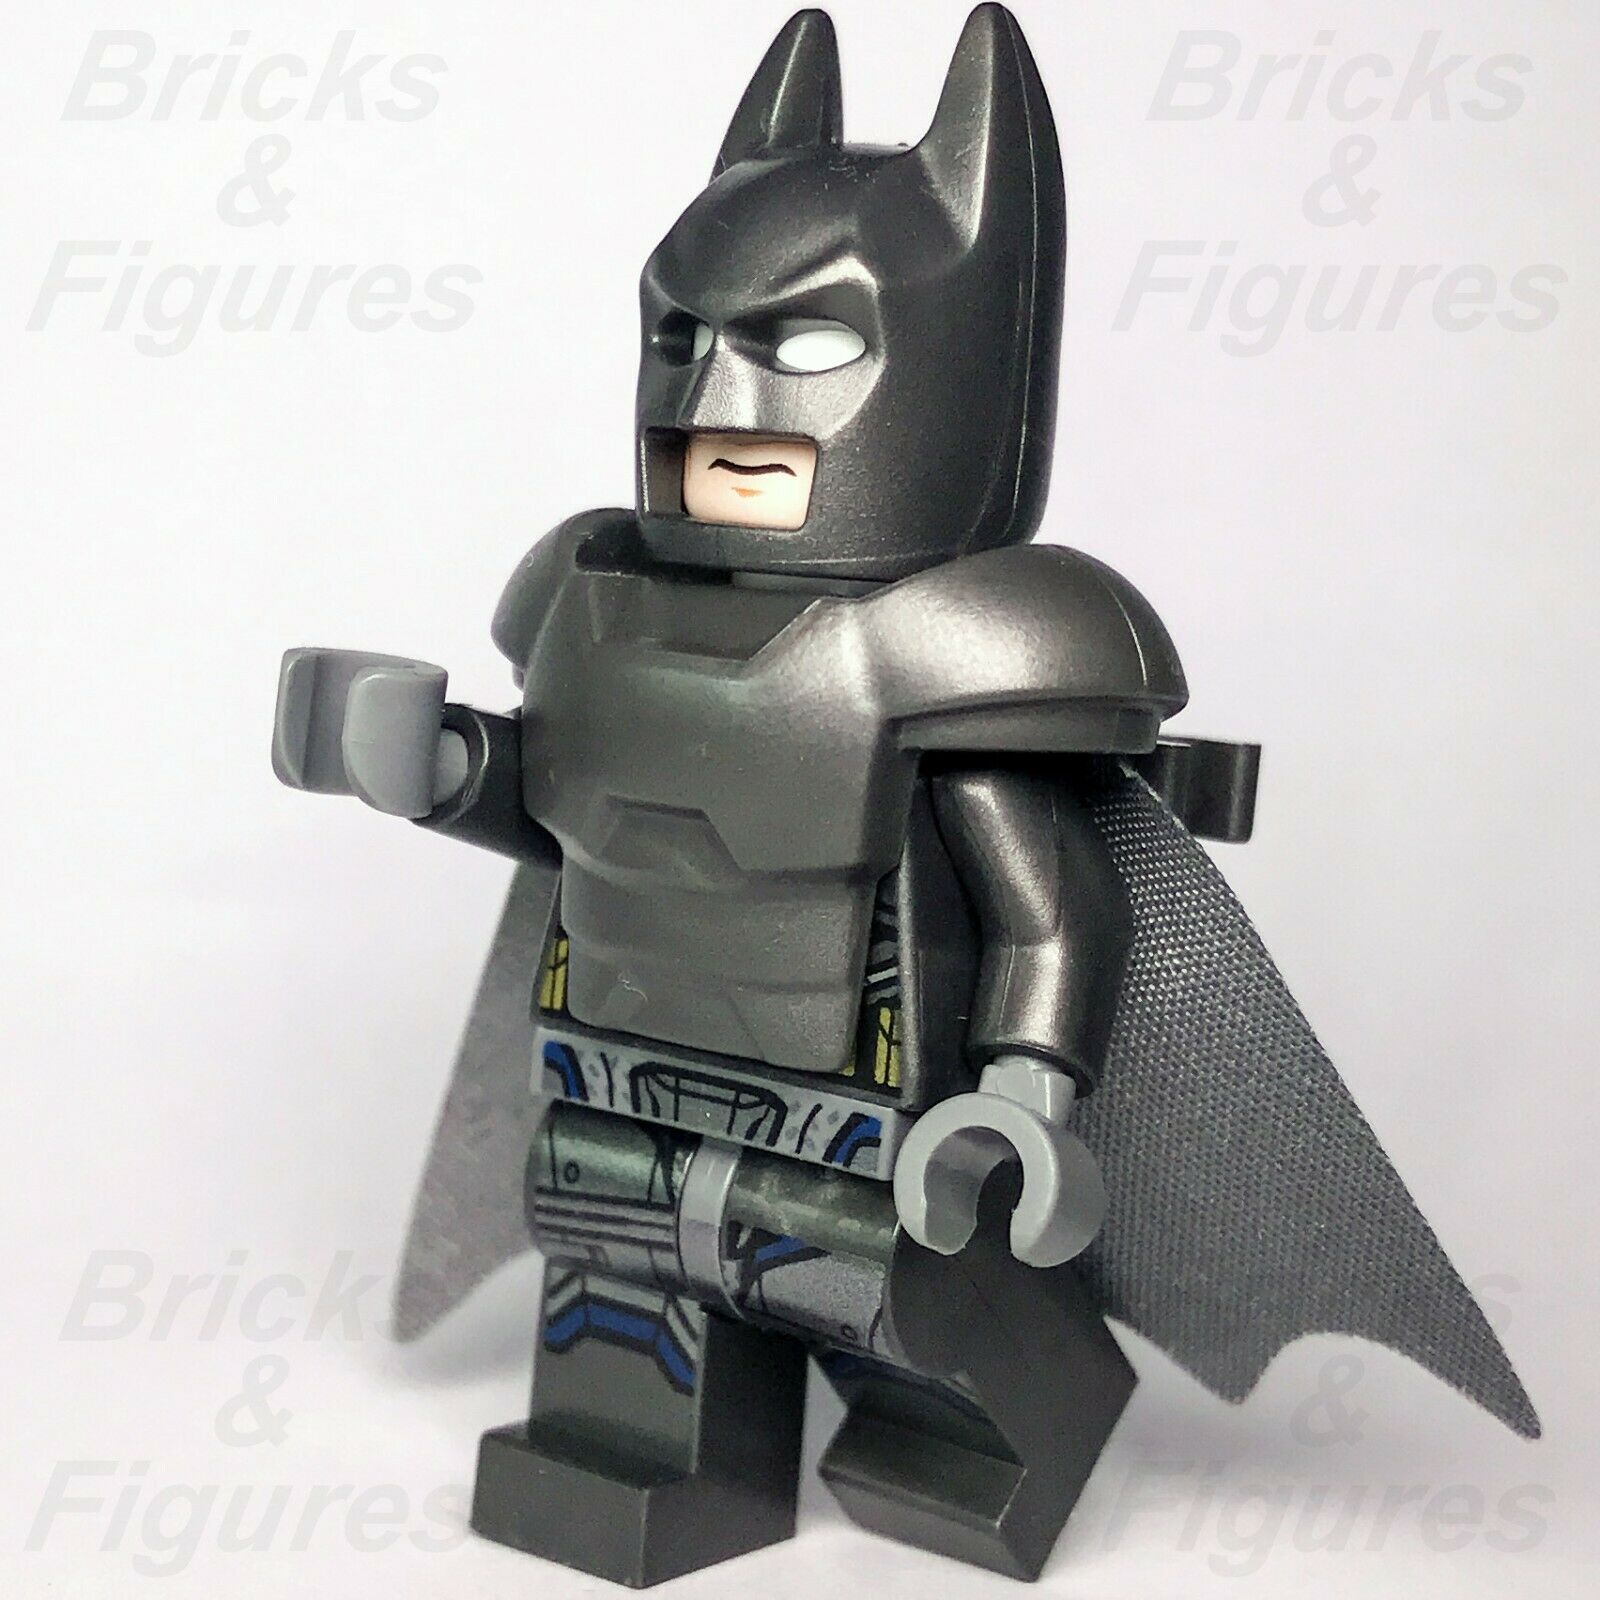 DC Super Heroes LEGO Batman Armored with Cape Dawn of Justice Minifigure 76044 - Bricks & Figures